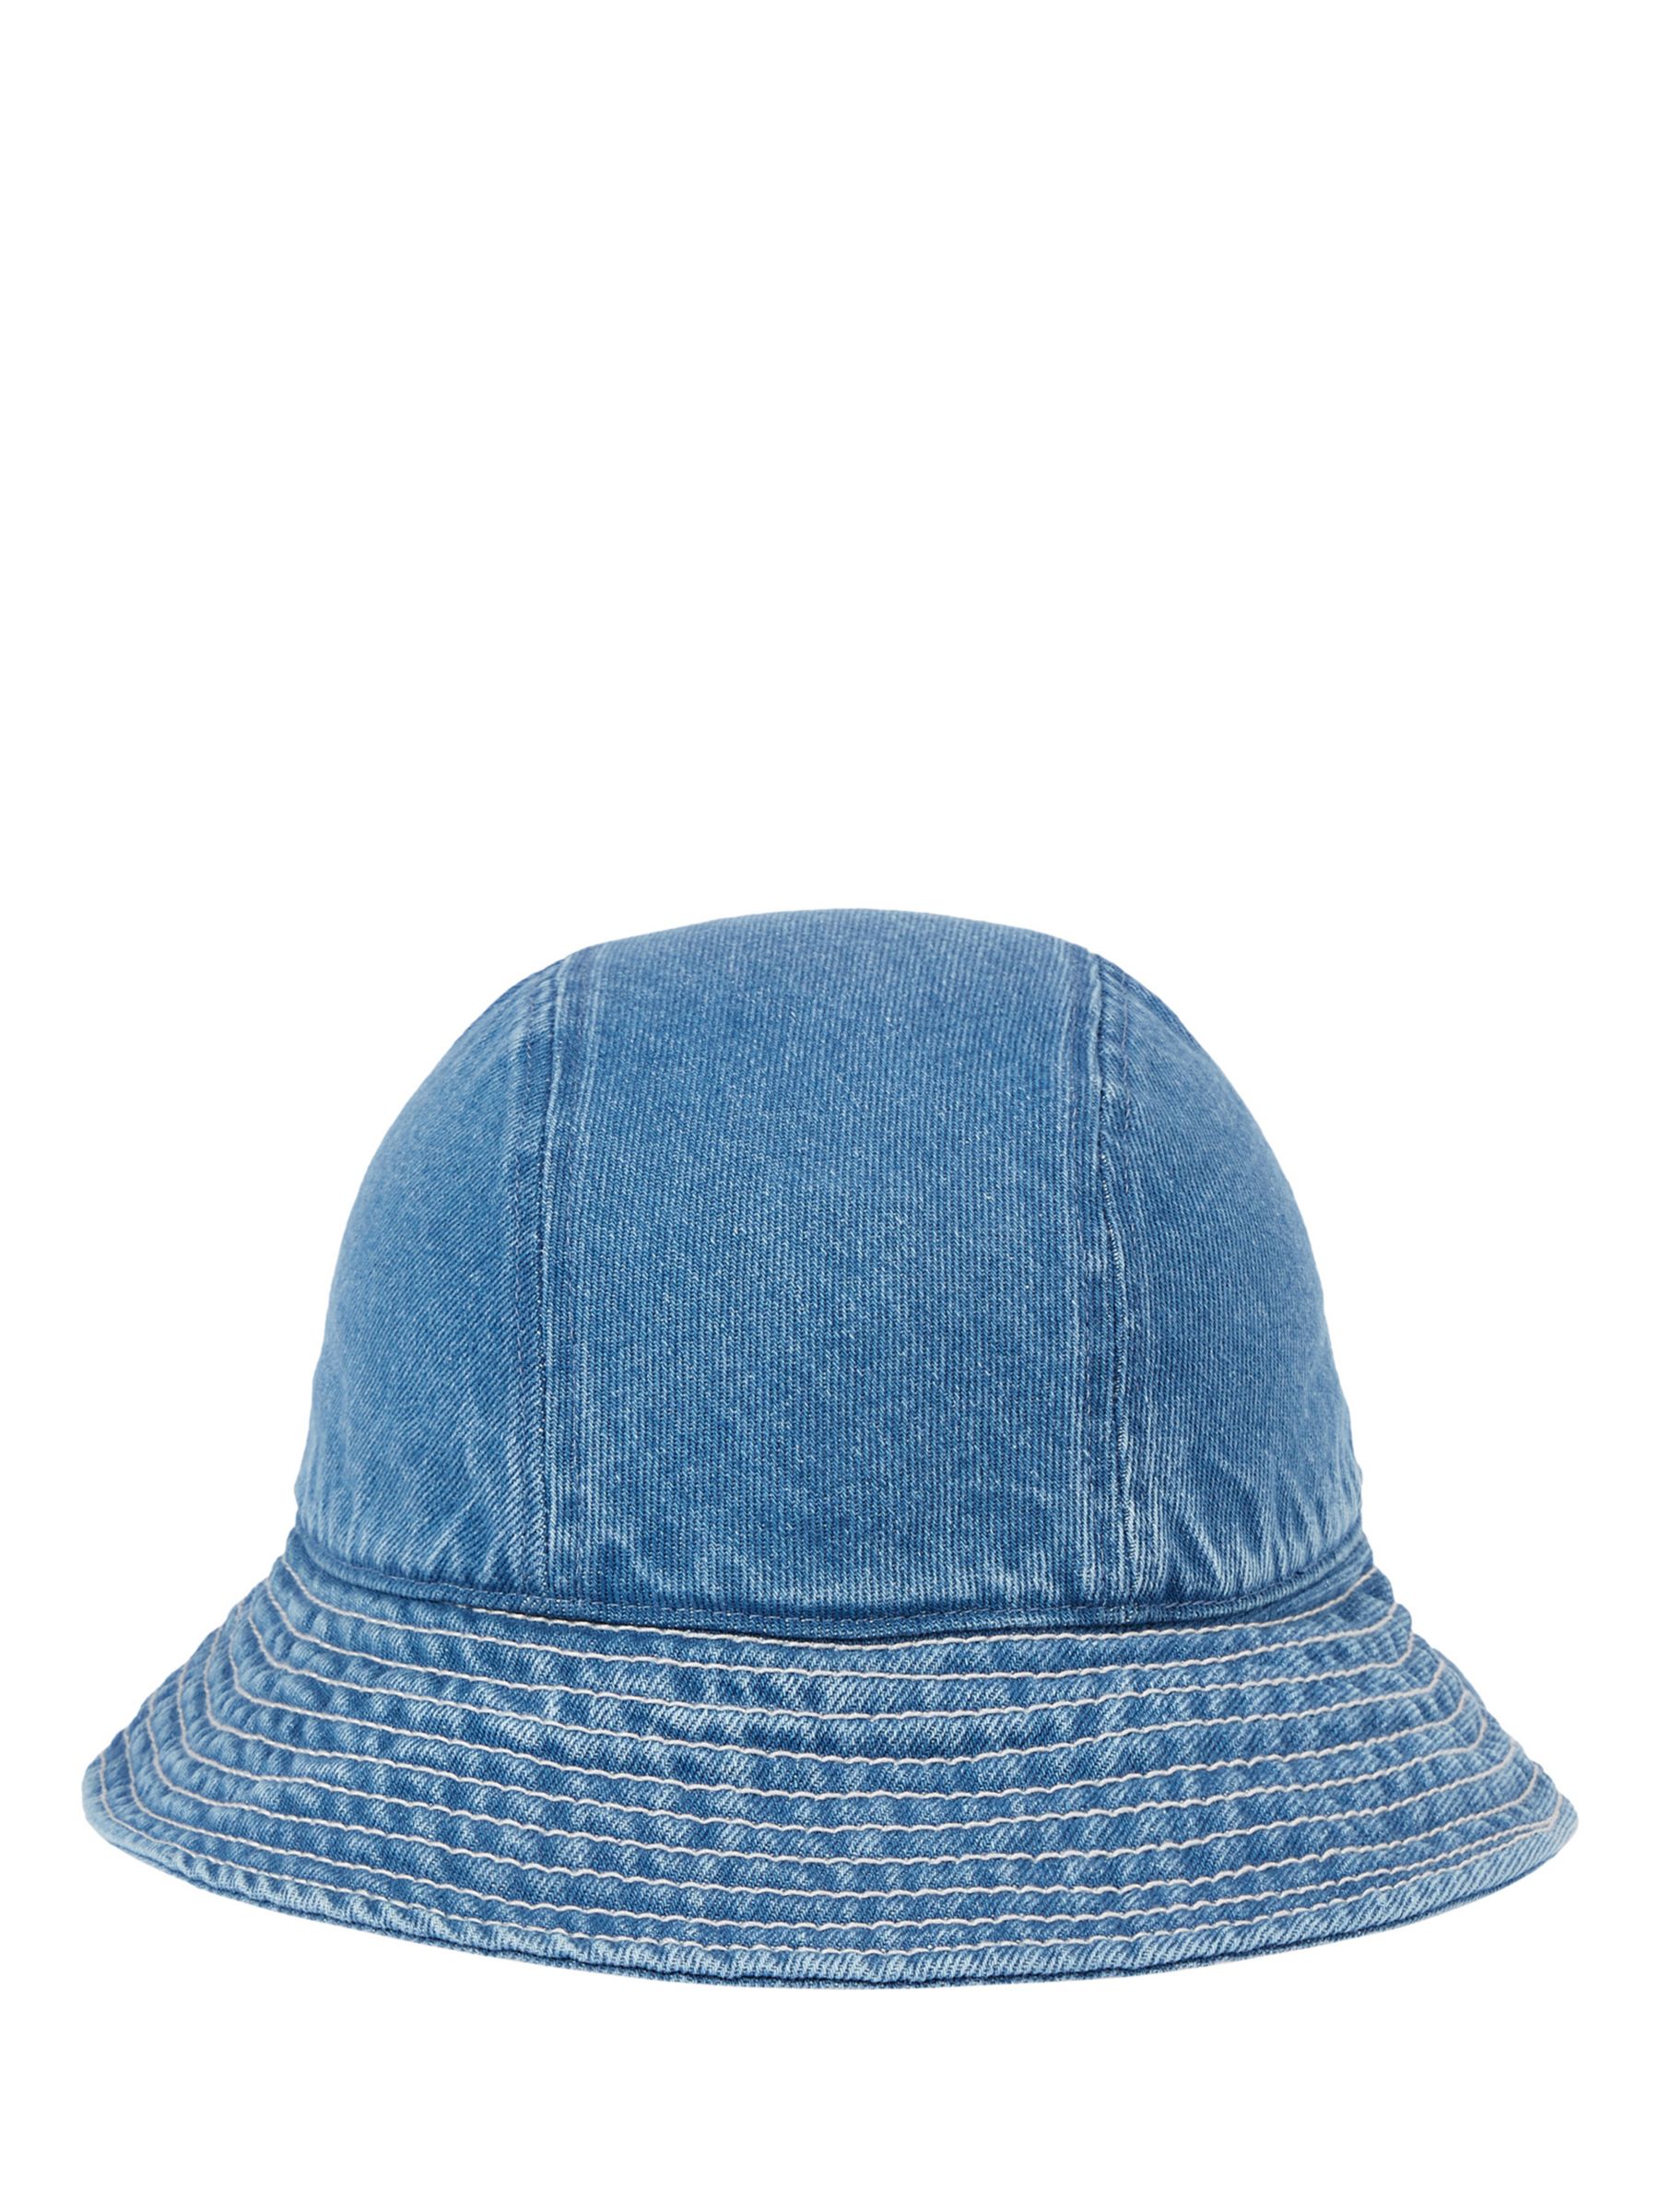 Tommy Hilfiger Iconic Bucket Hat, Mid Denim at Lewis & Partners